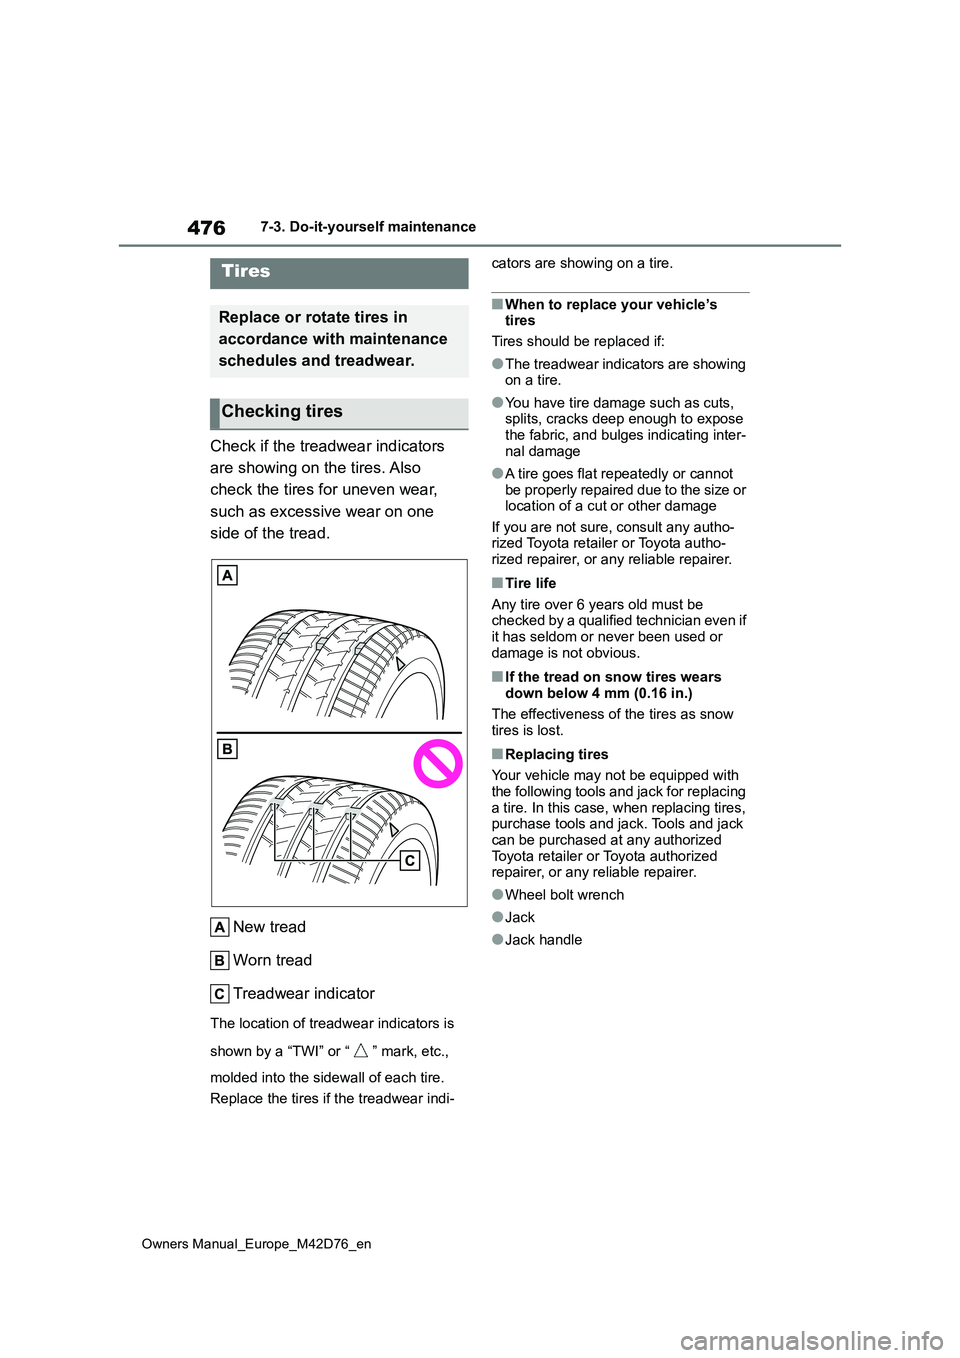 TOYOTA BZ4X 2022  Owners Manual (in English) 476
Owners Manual_Europe_M42D76_en
7-3. Do-it-yourself maintenance
Check if the treadwear indicators  
are showing on the tires. Also  
check the tires for uneven wear,  
such as excessive wear on one